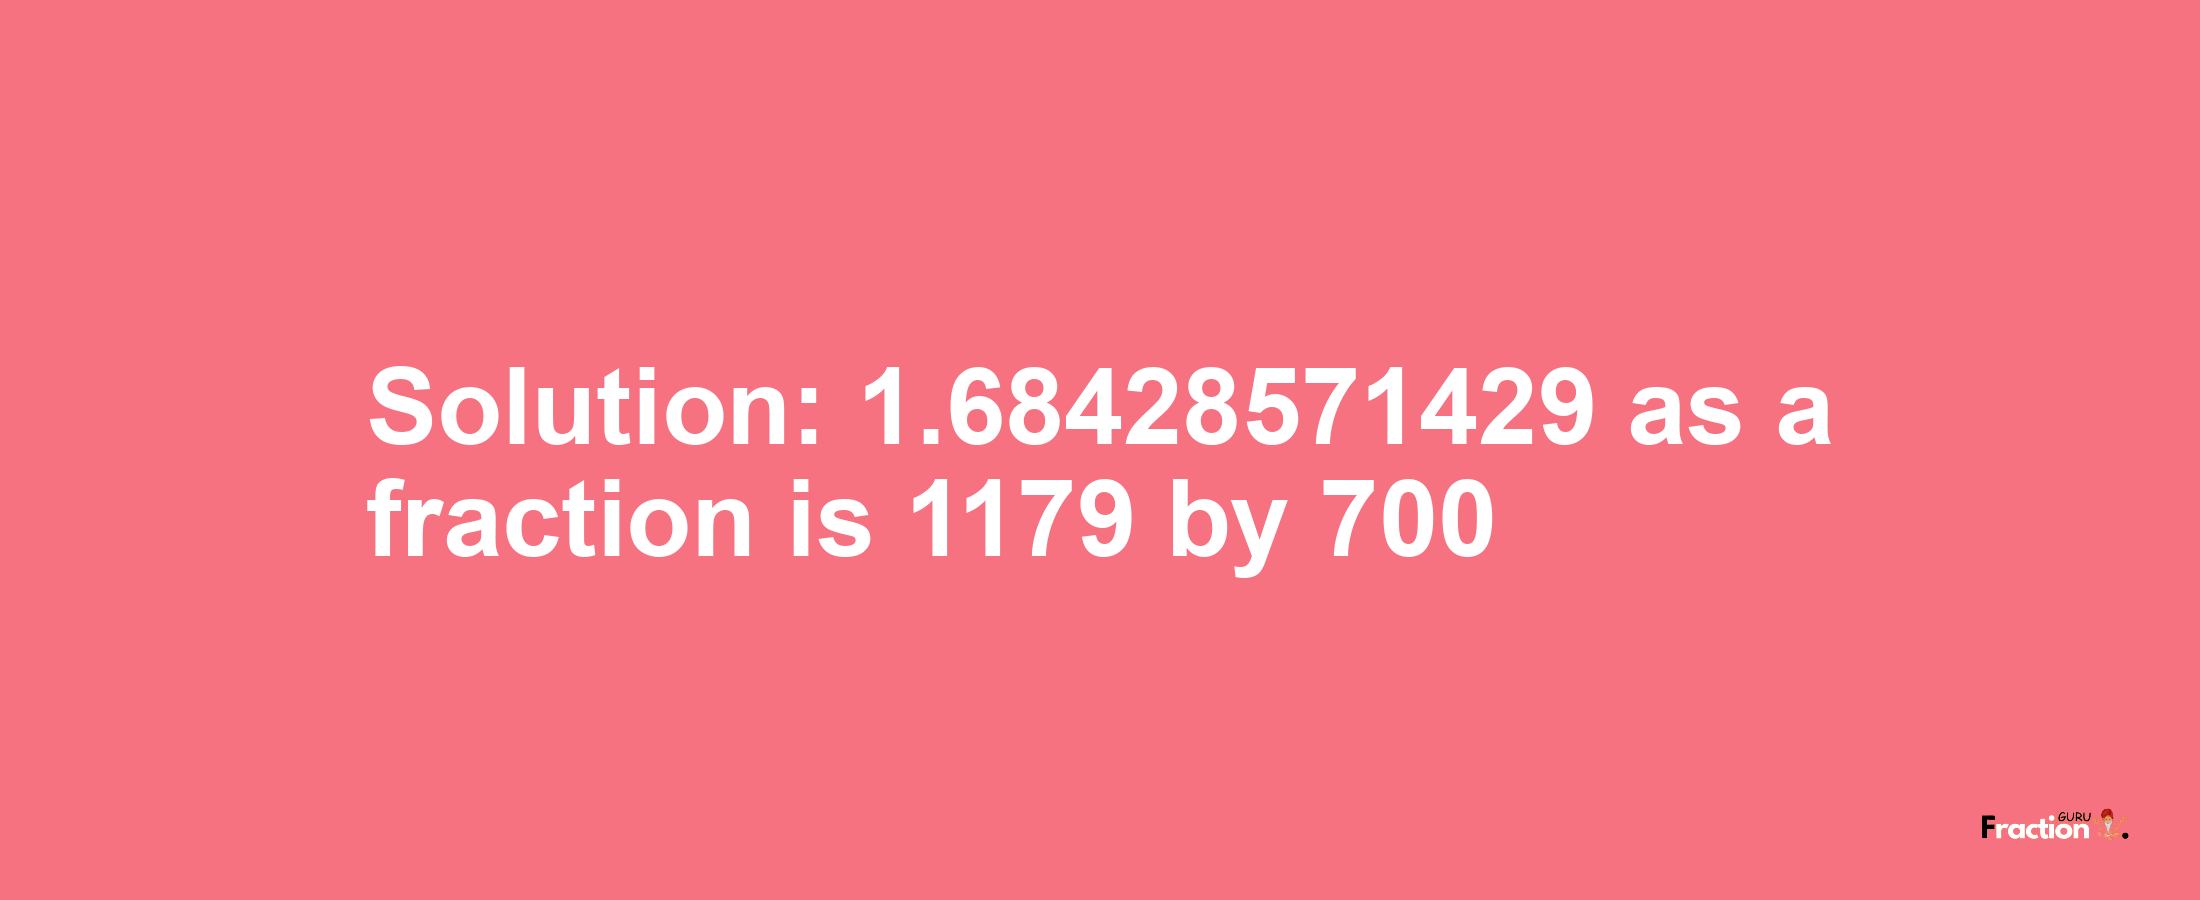 Solution:1.68428571429 as a fraction is 1179/700